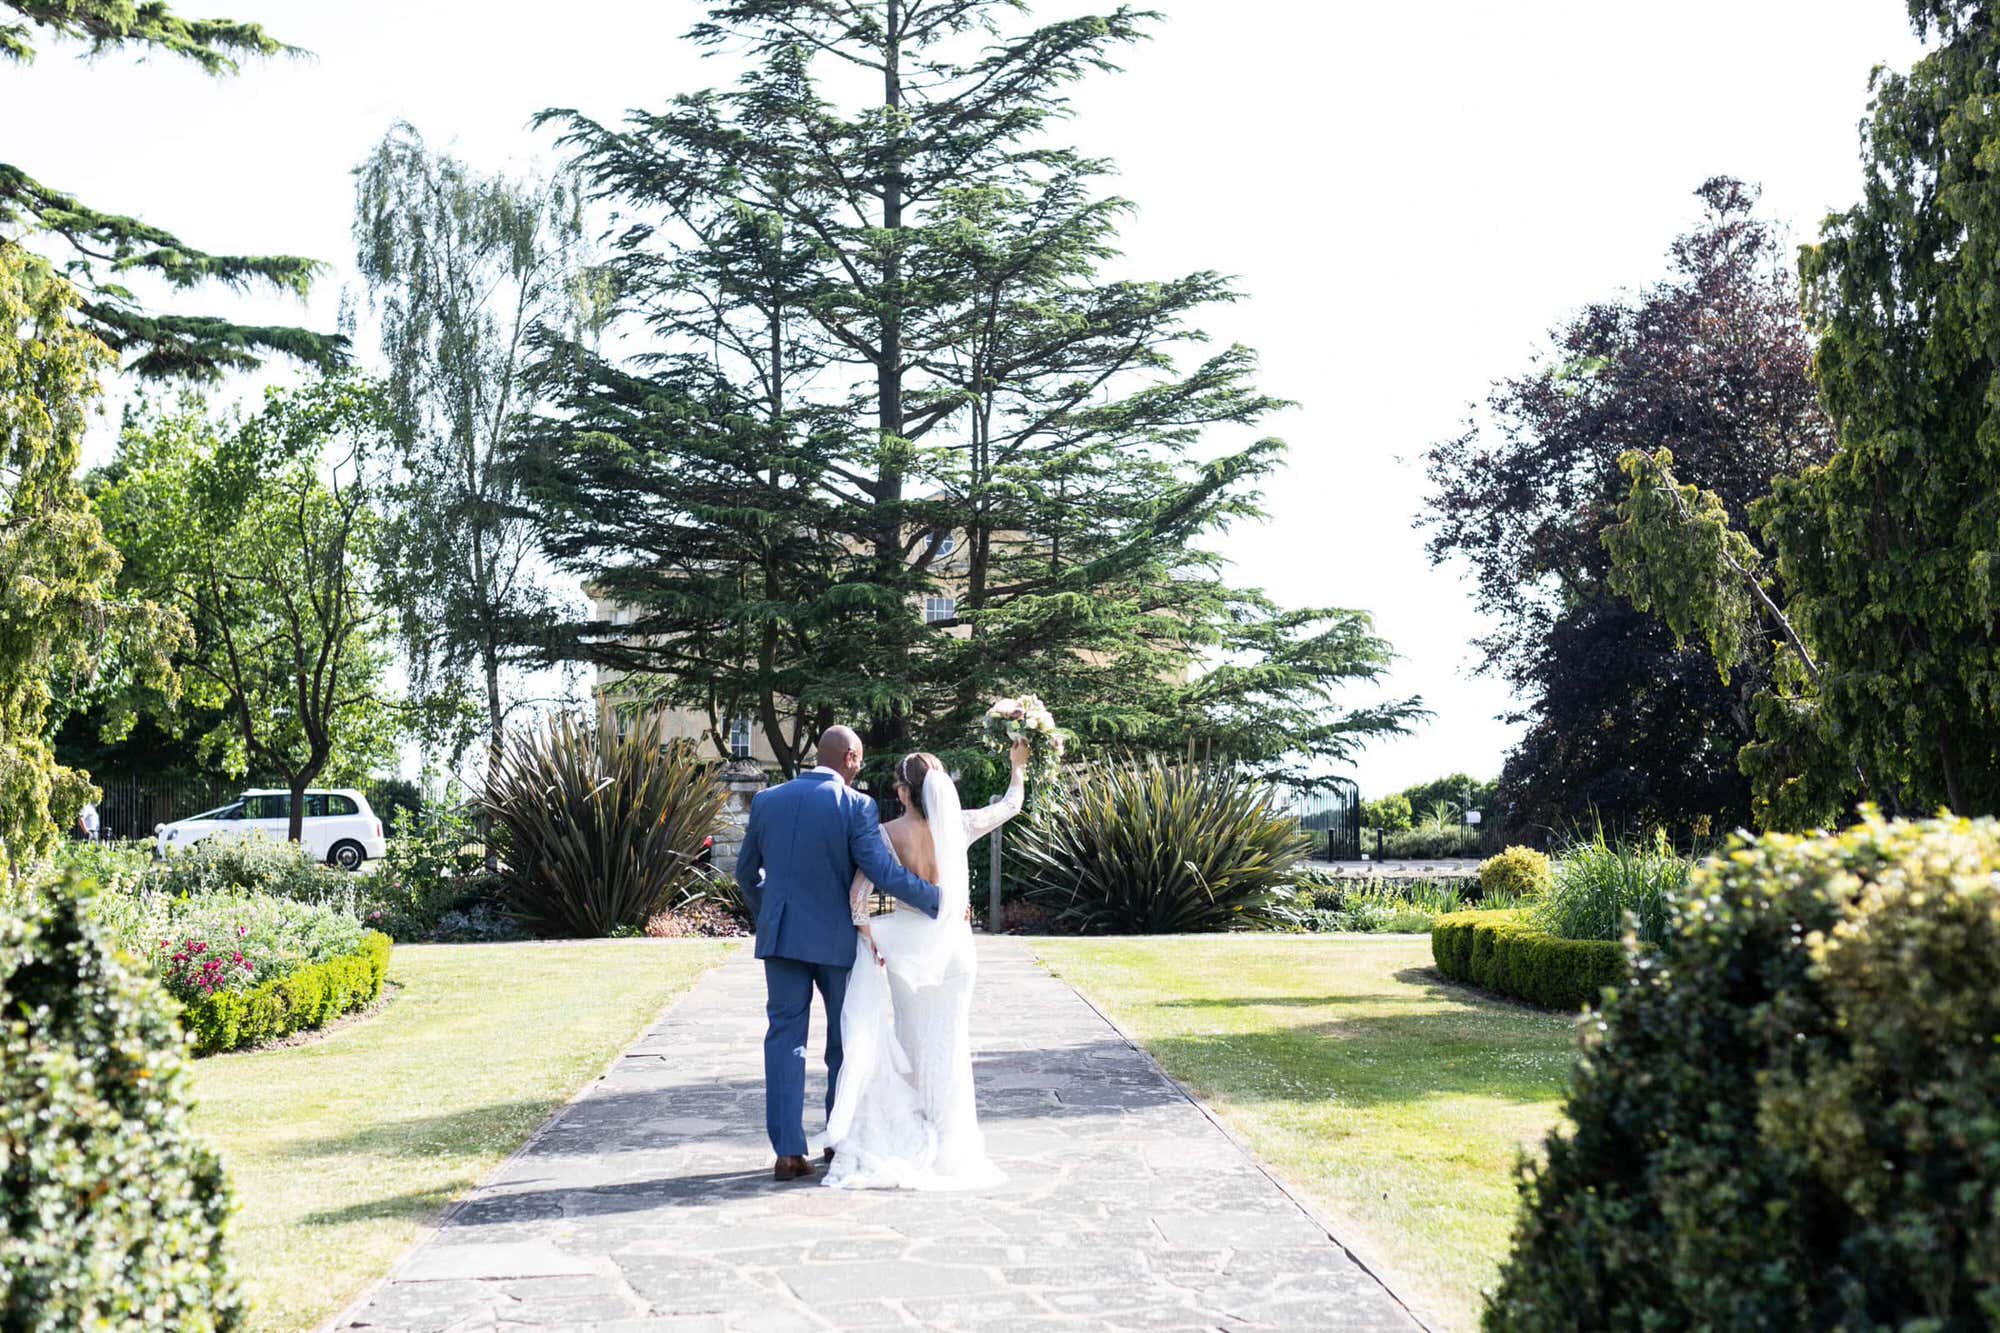 Bride and groom walking away from the camera after their wedding ceremony at Danson House Bexleyheat